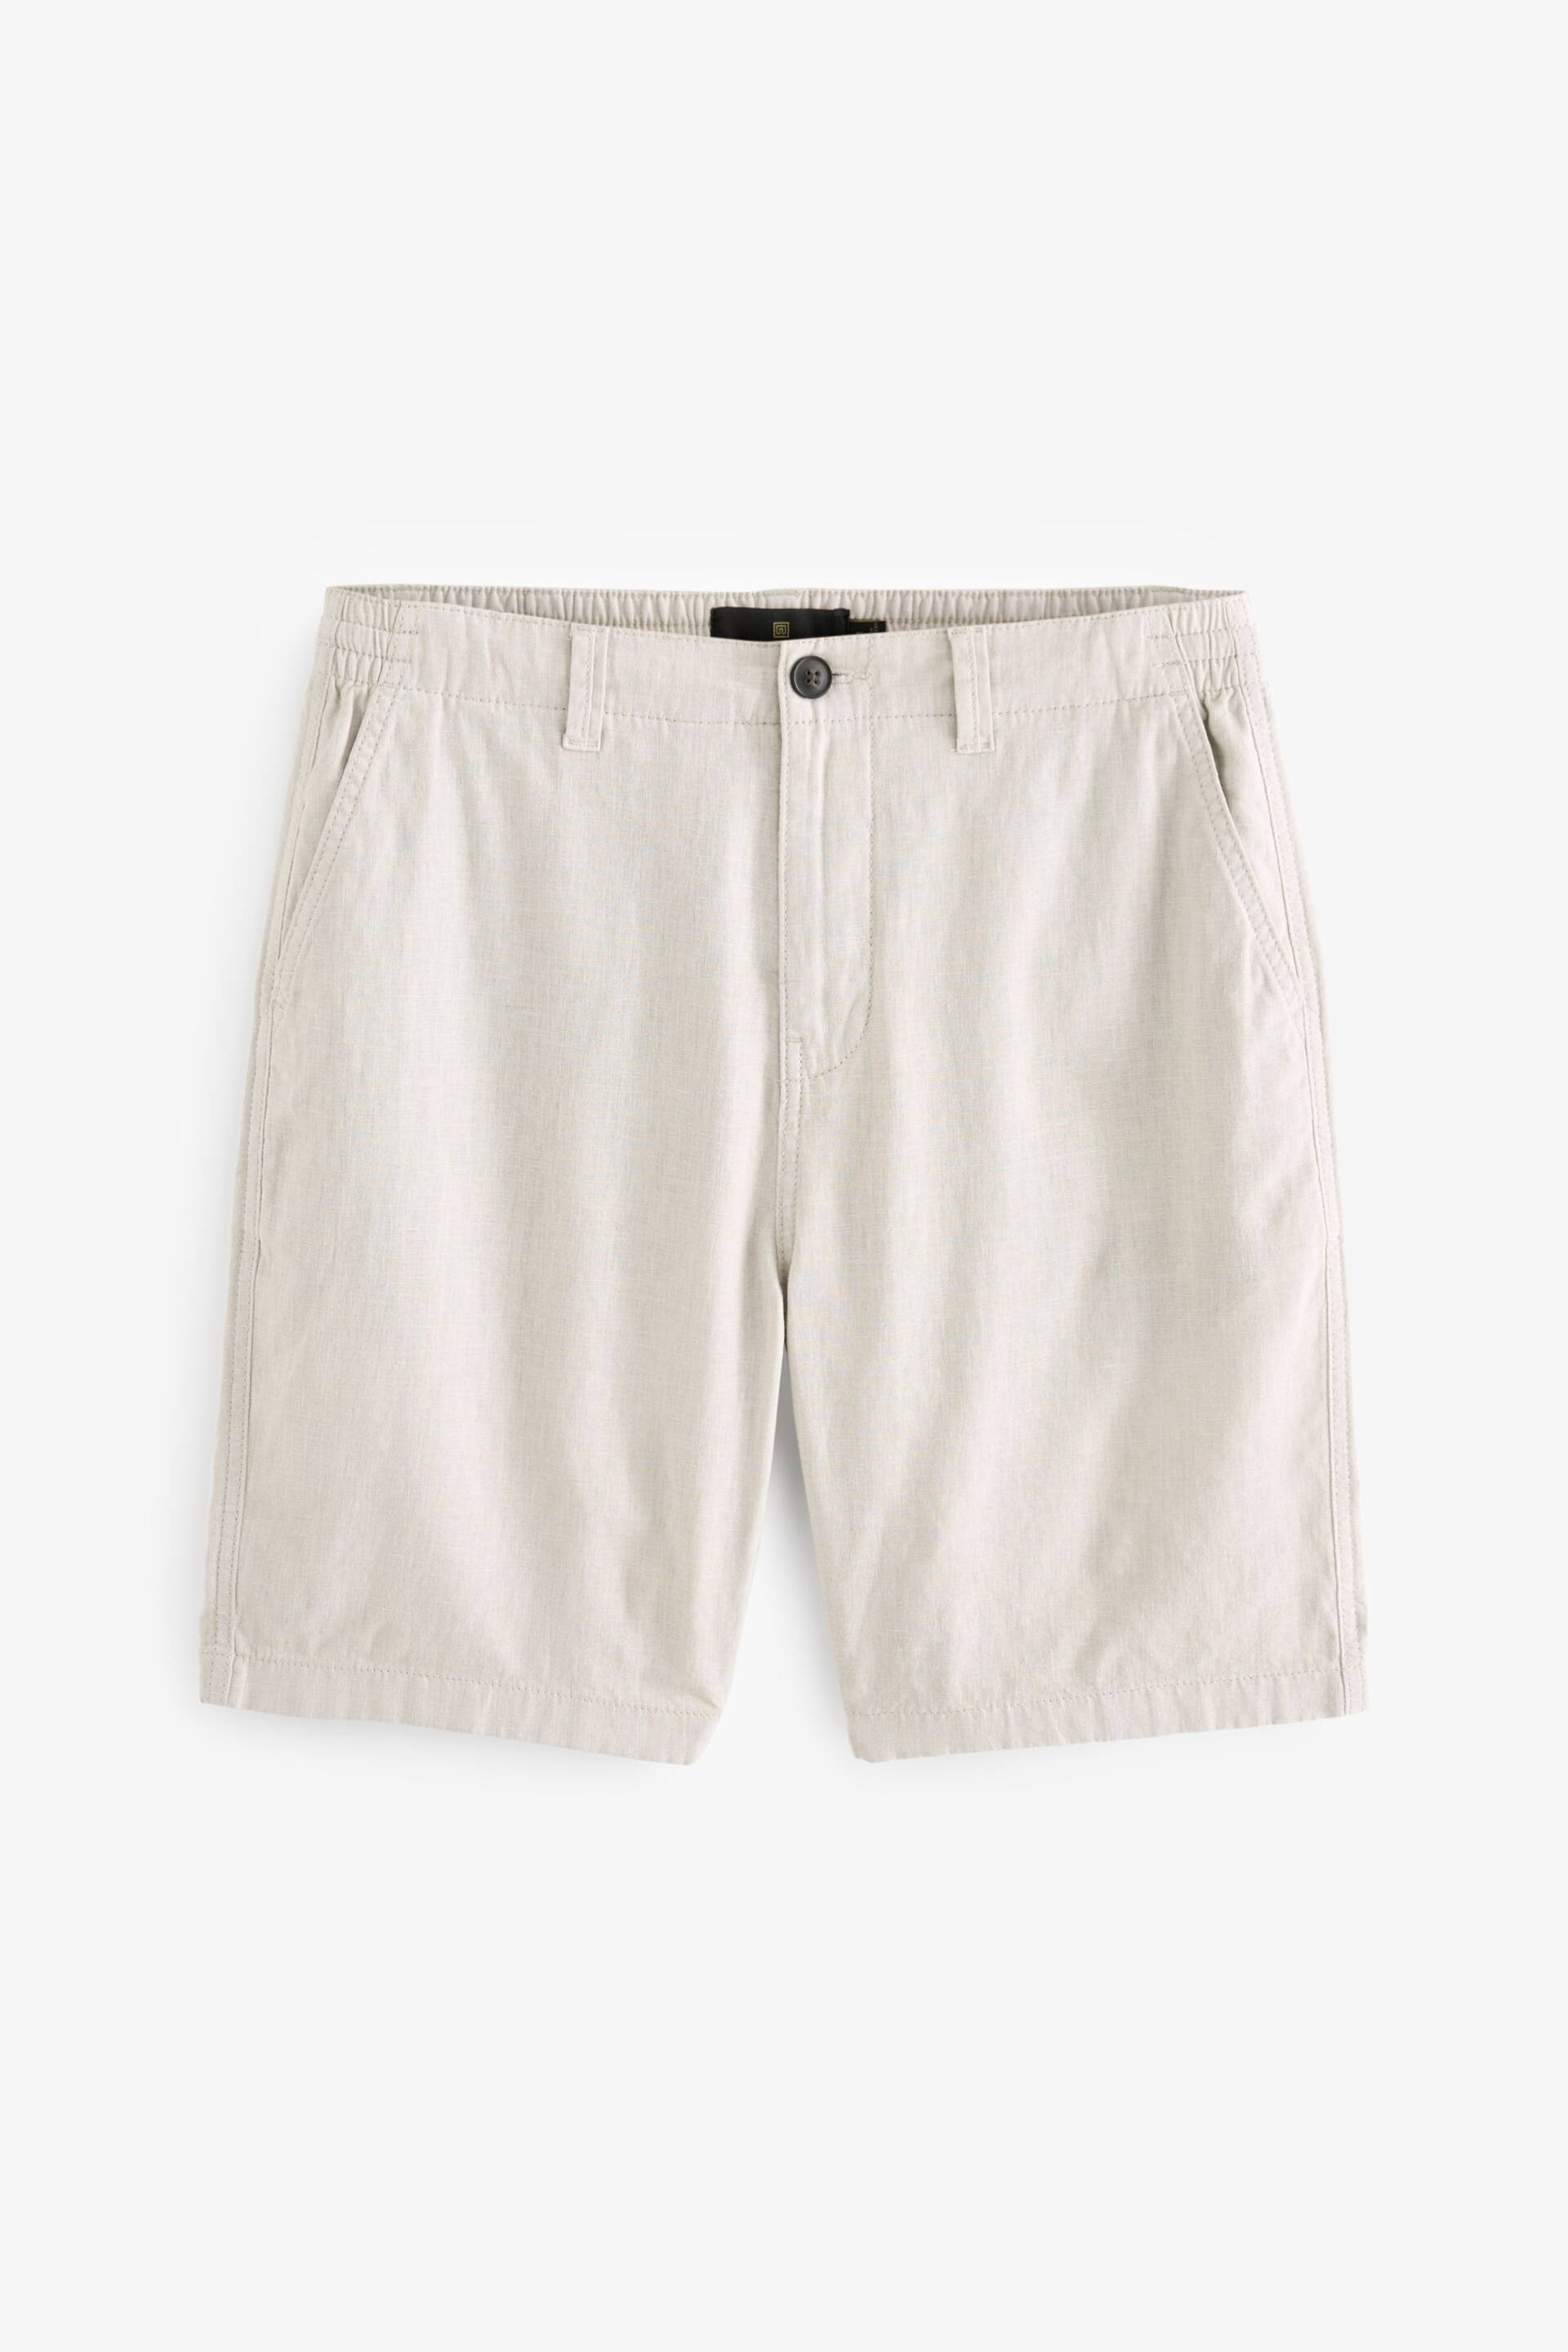 Grey Linen Blend Chino Shorts - Image 5 of 9